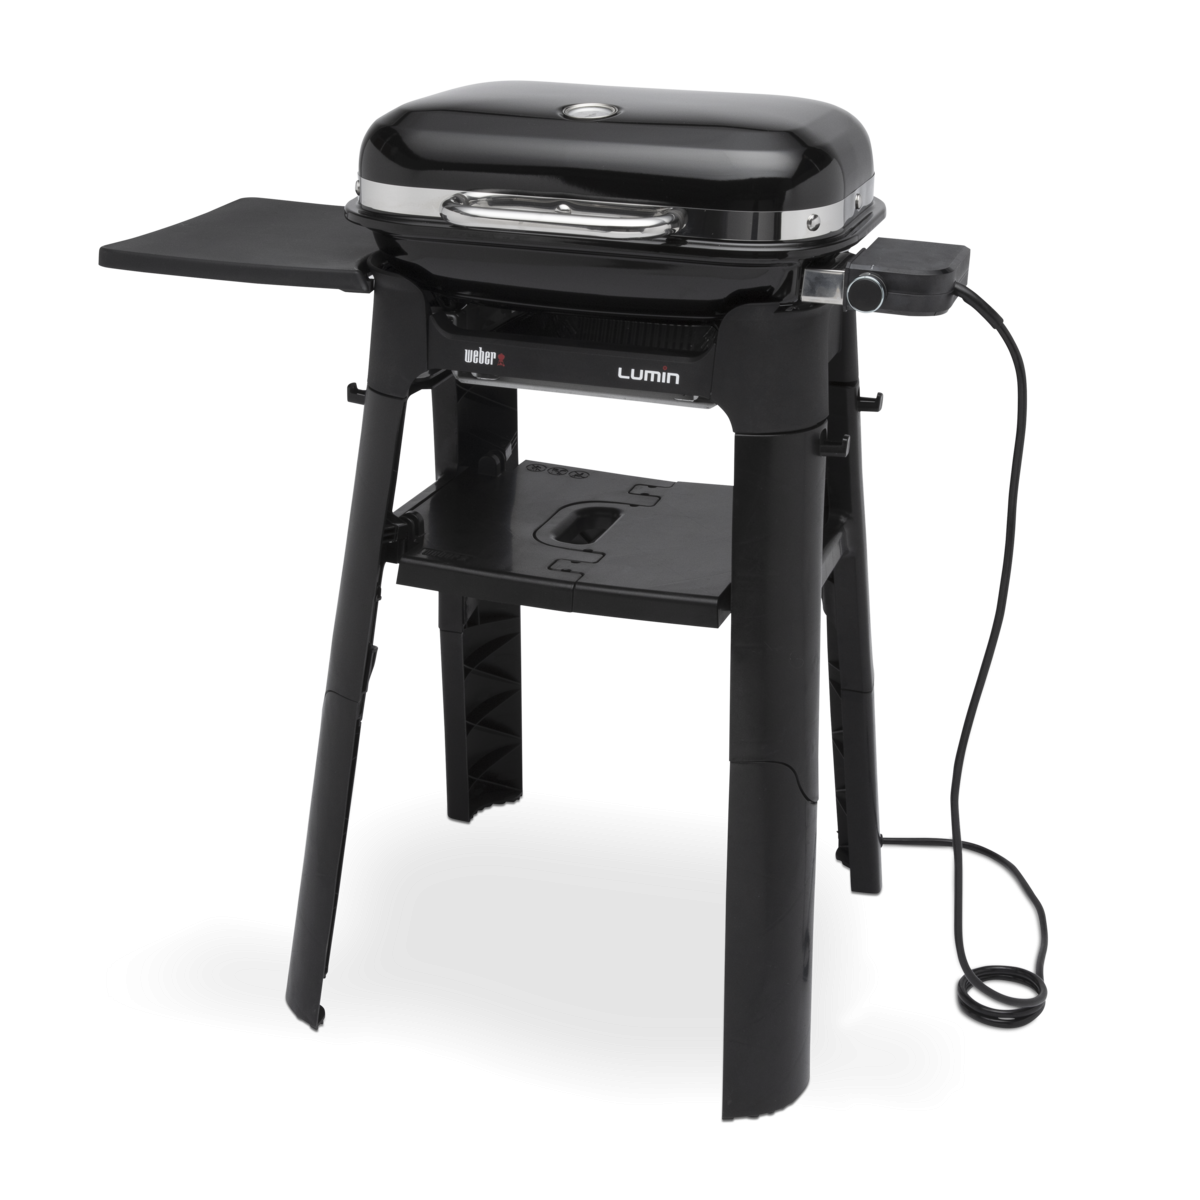 WEBER Lumin black electric grill w/stand, 91010853